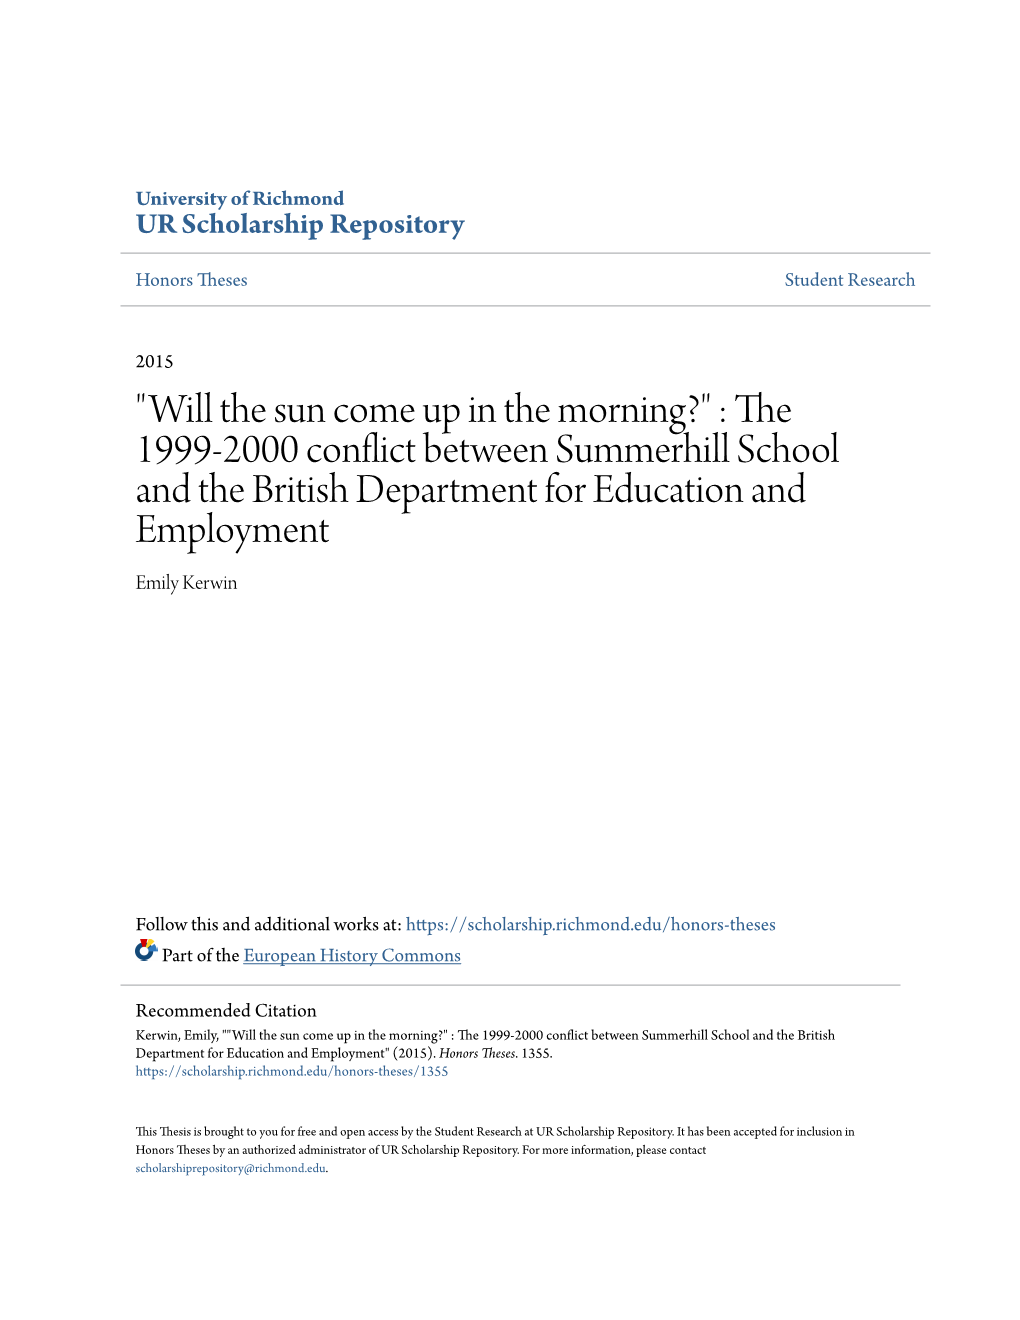 "Will the Sun Come up in the Morning?" : the 1999-2000 Conflict Between Summerhill School and the British Department for Education and Employment Emily Kerwin